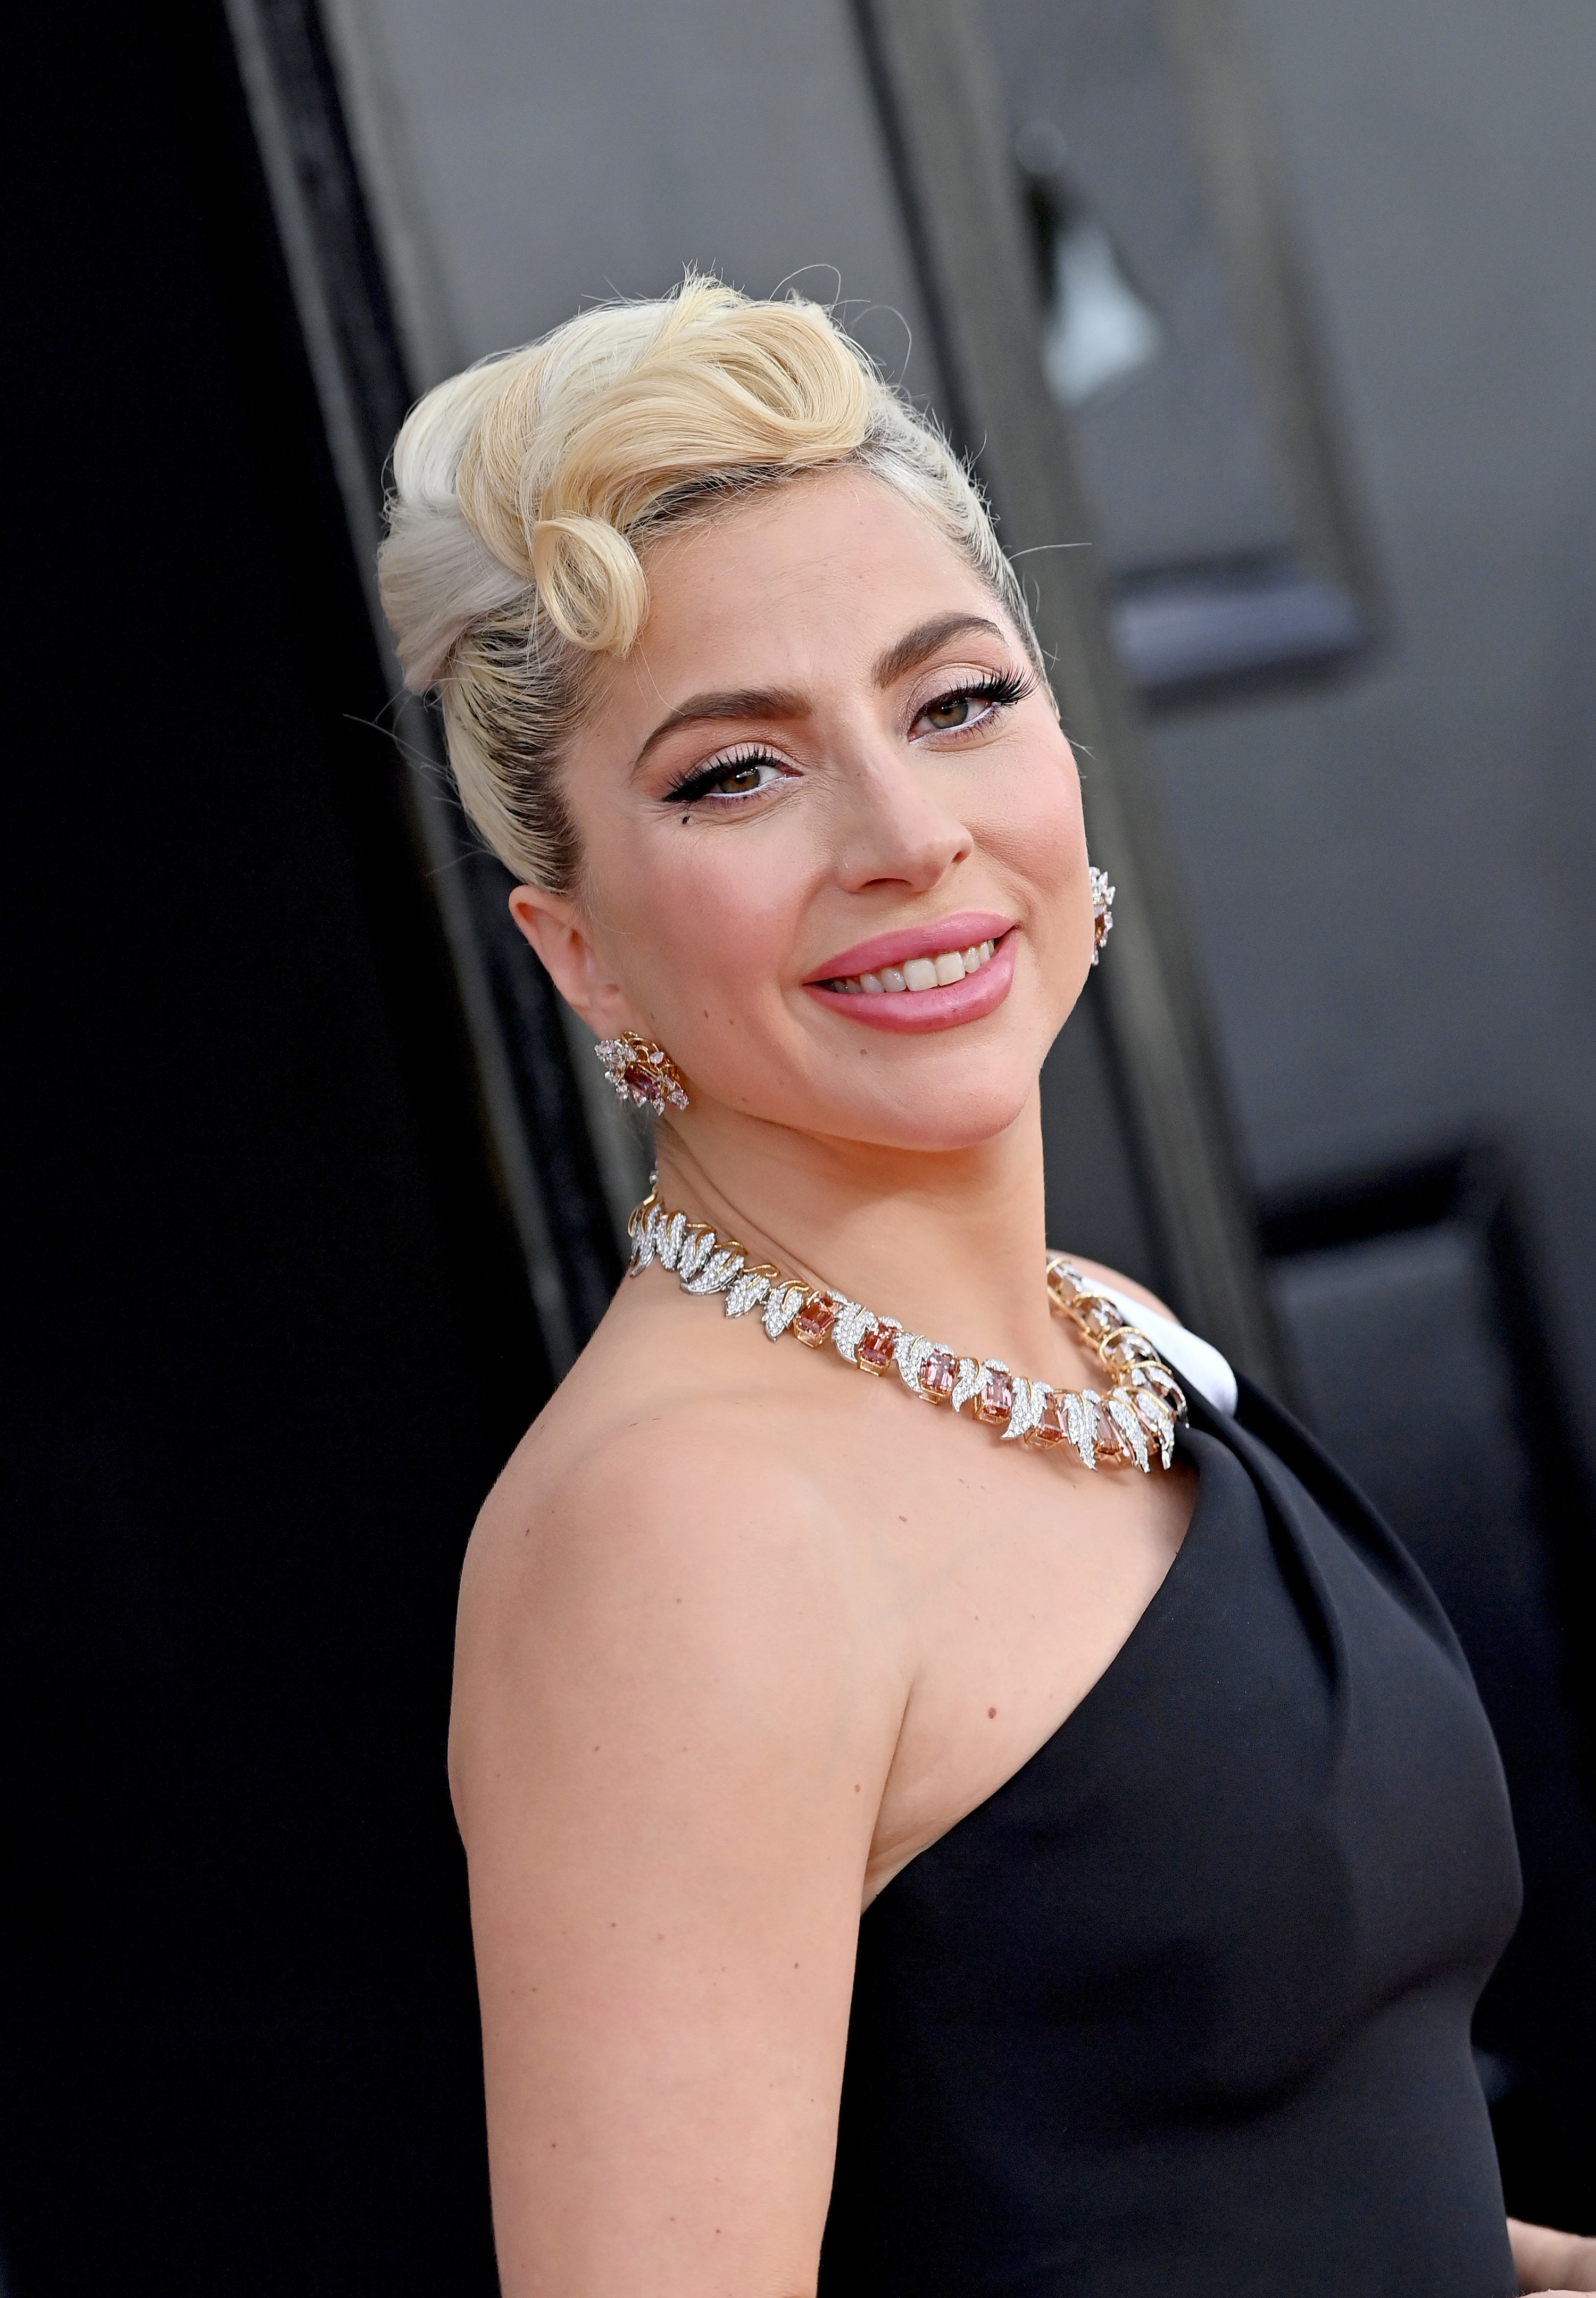 Lady Gaga smiles as she&#x27;s pictured at the Grammy Awards